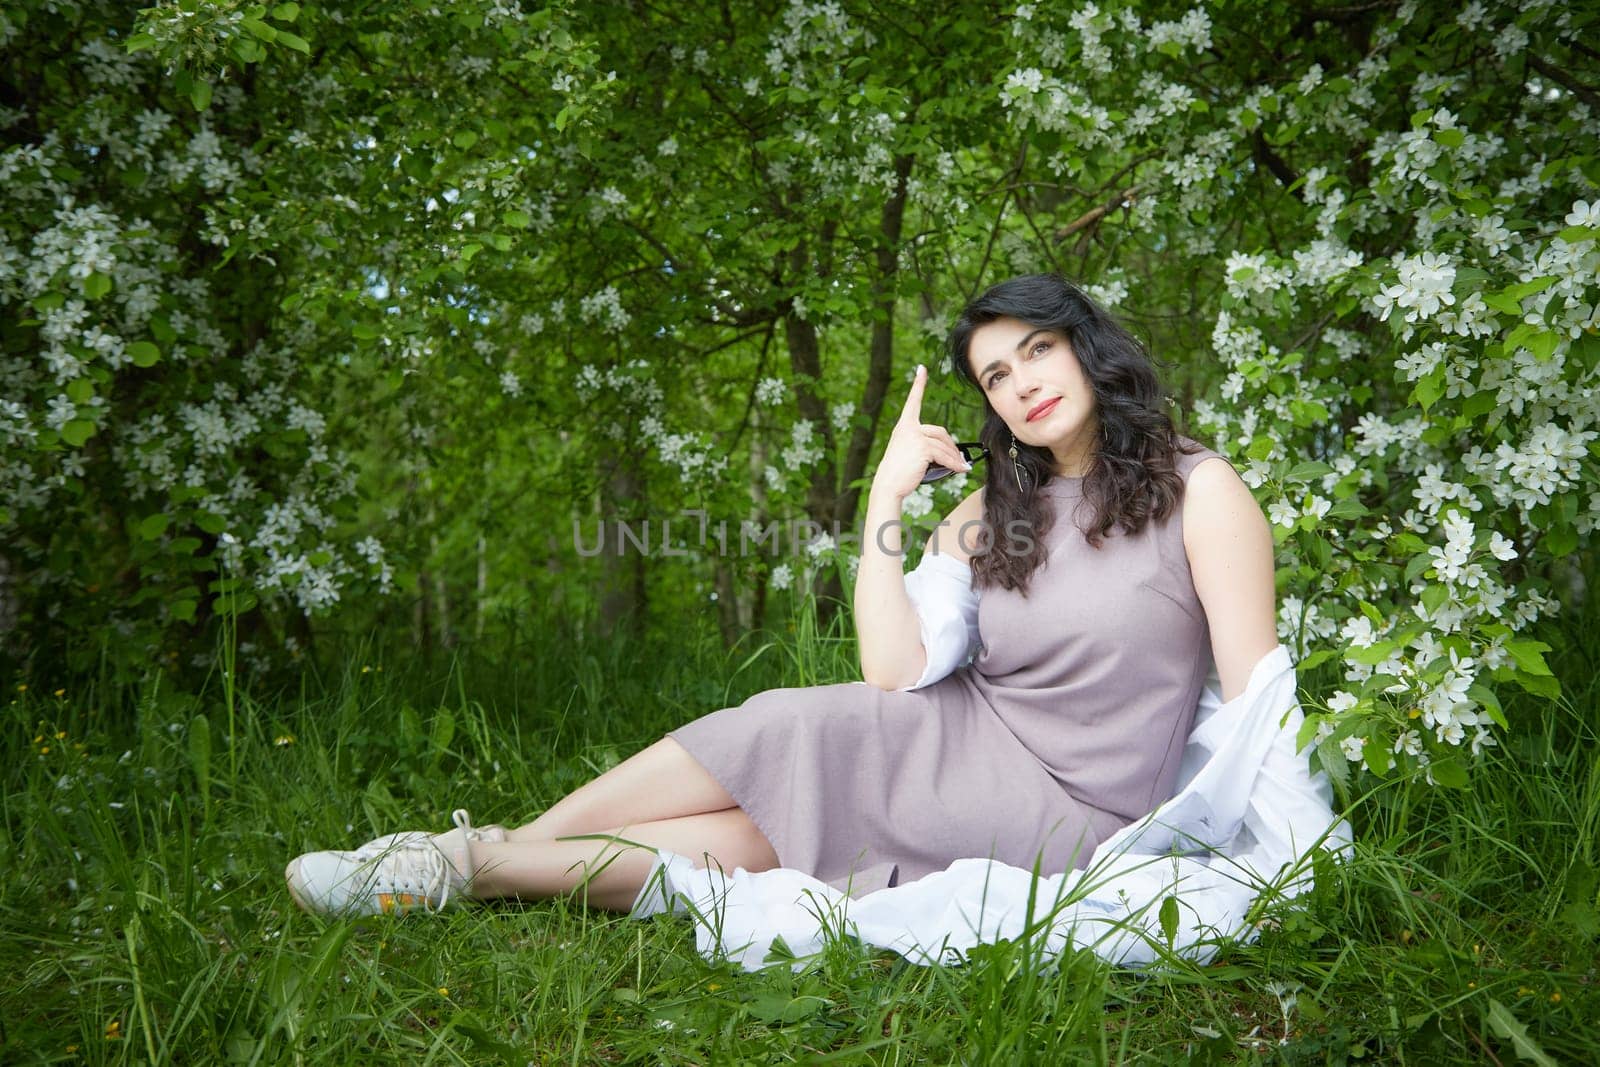 Joyous brunette woman near Blossoms of apple tree in a Spring Garden outdoors. The Concept of face and body care. The scent of perfume and tenderness